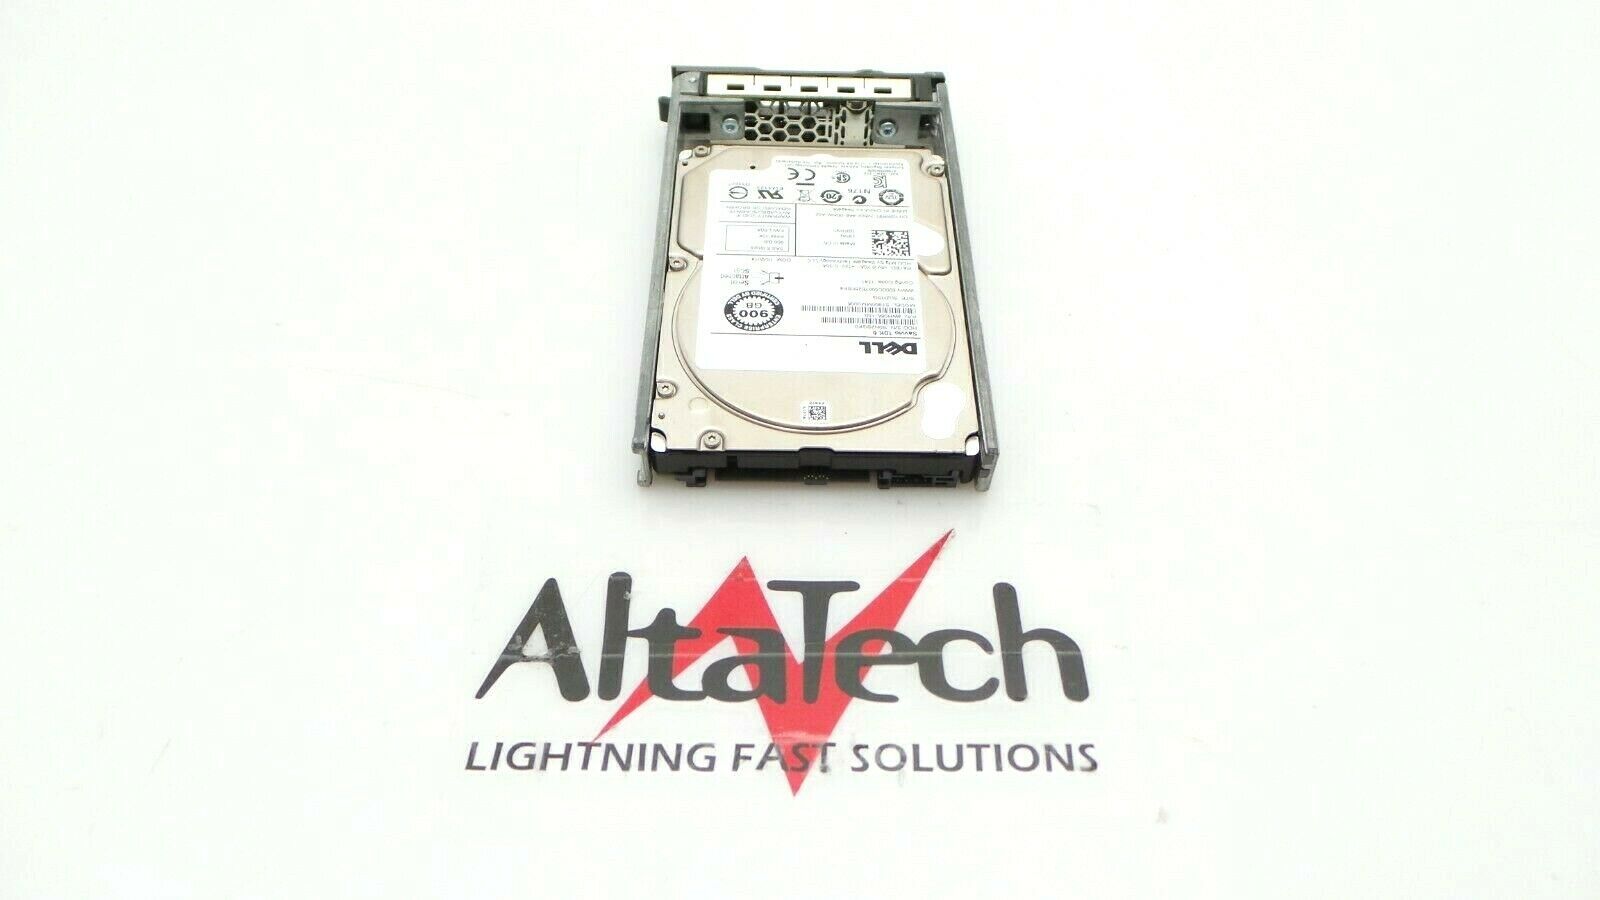 Dell 9WH066-150 900GB 10K SAS 2.5" 6G, Used